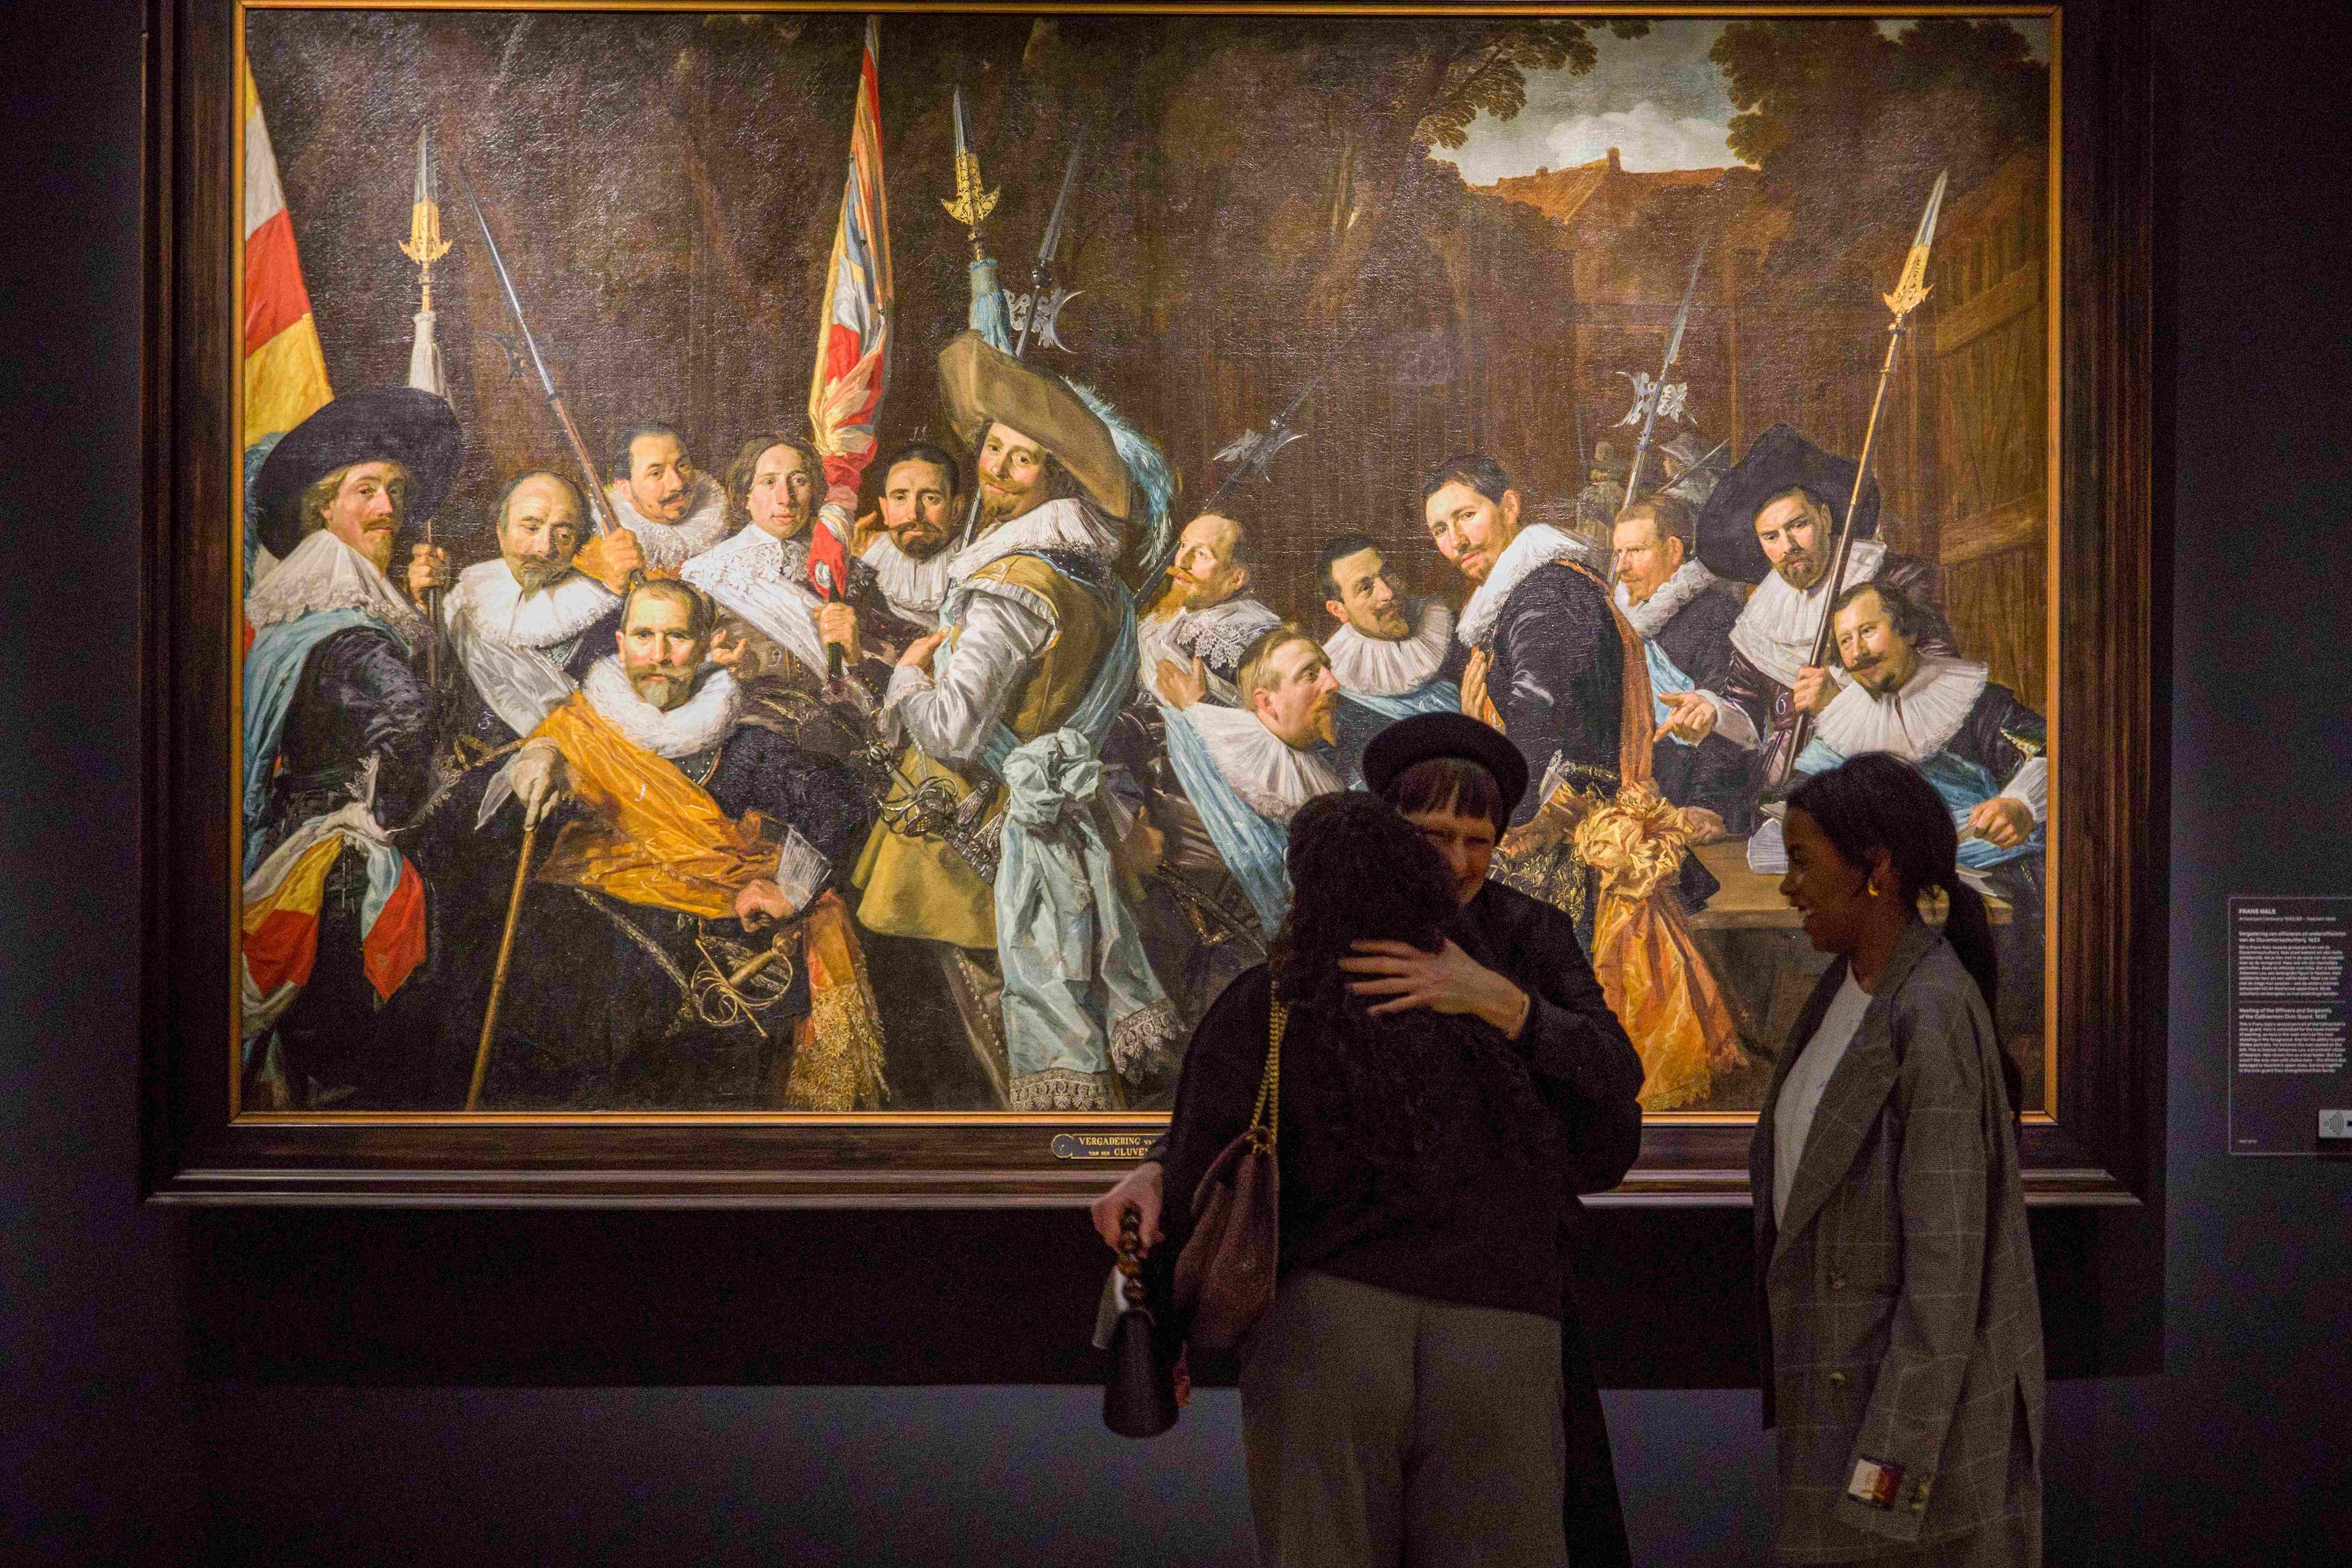 Visitors near a group portrait of civic guards by Frans Hals in the Civic Guard Gallery (Schutterszaal) 